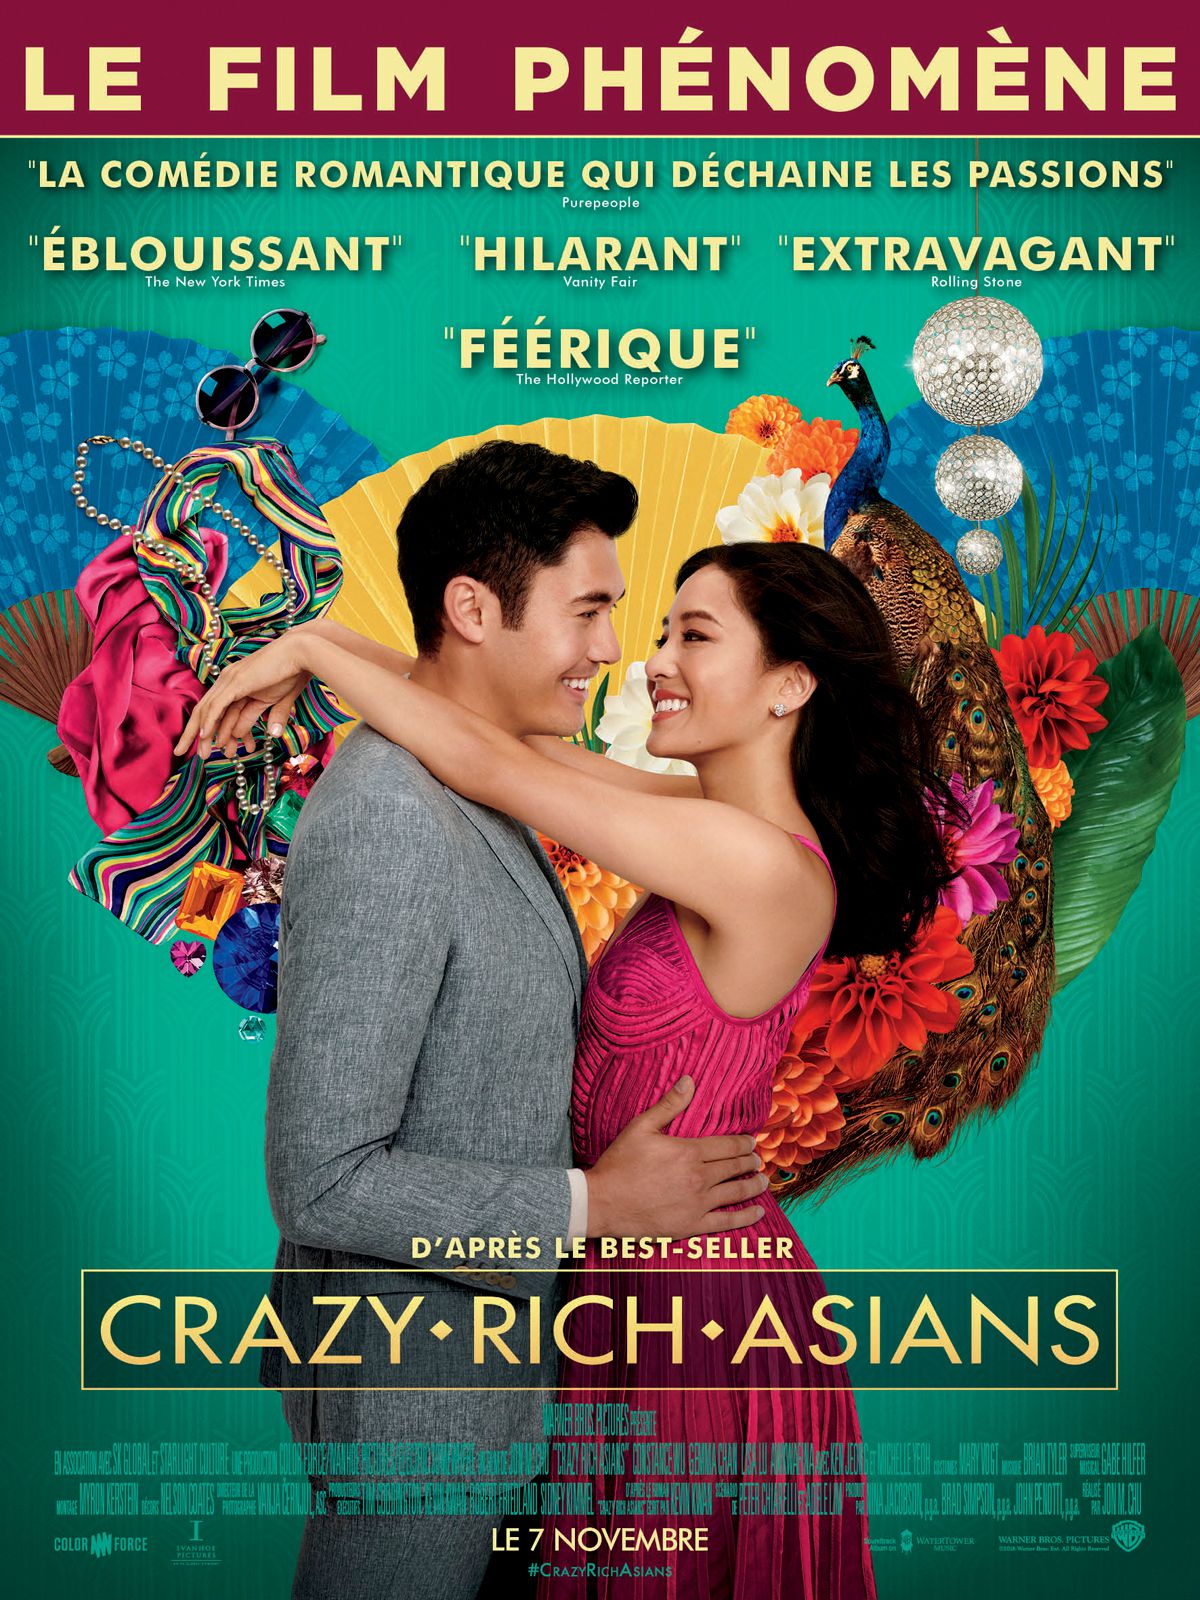 Crazy Rich Asians - Film (2018) streaming VF gratuit complet